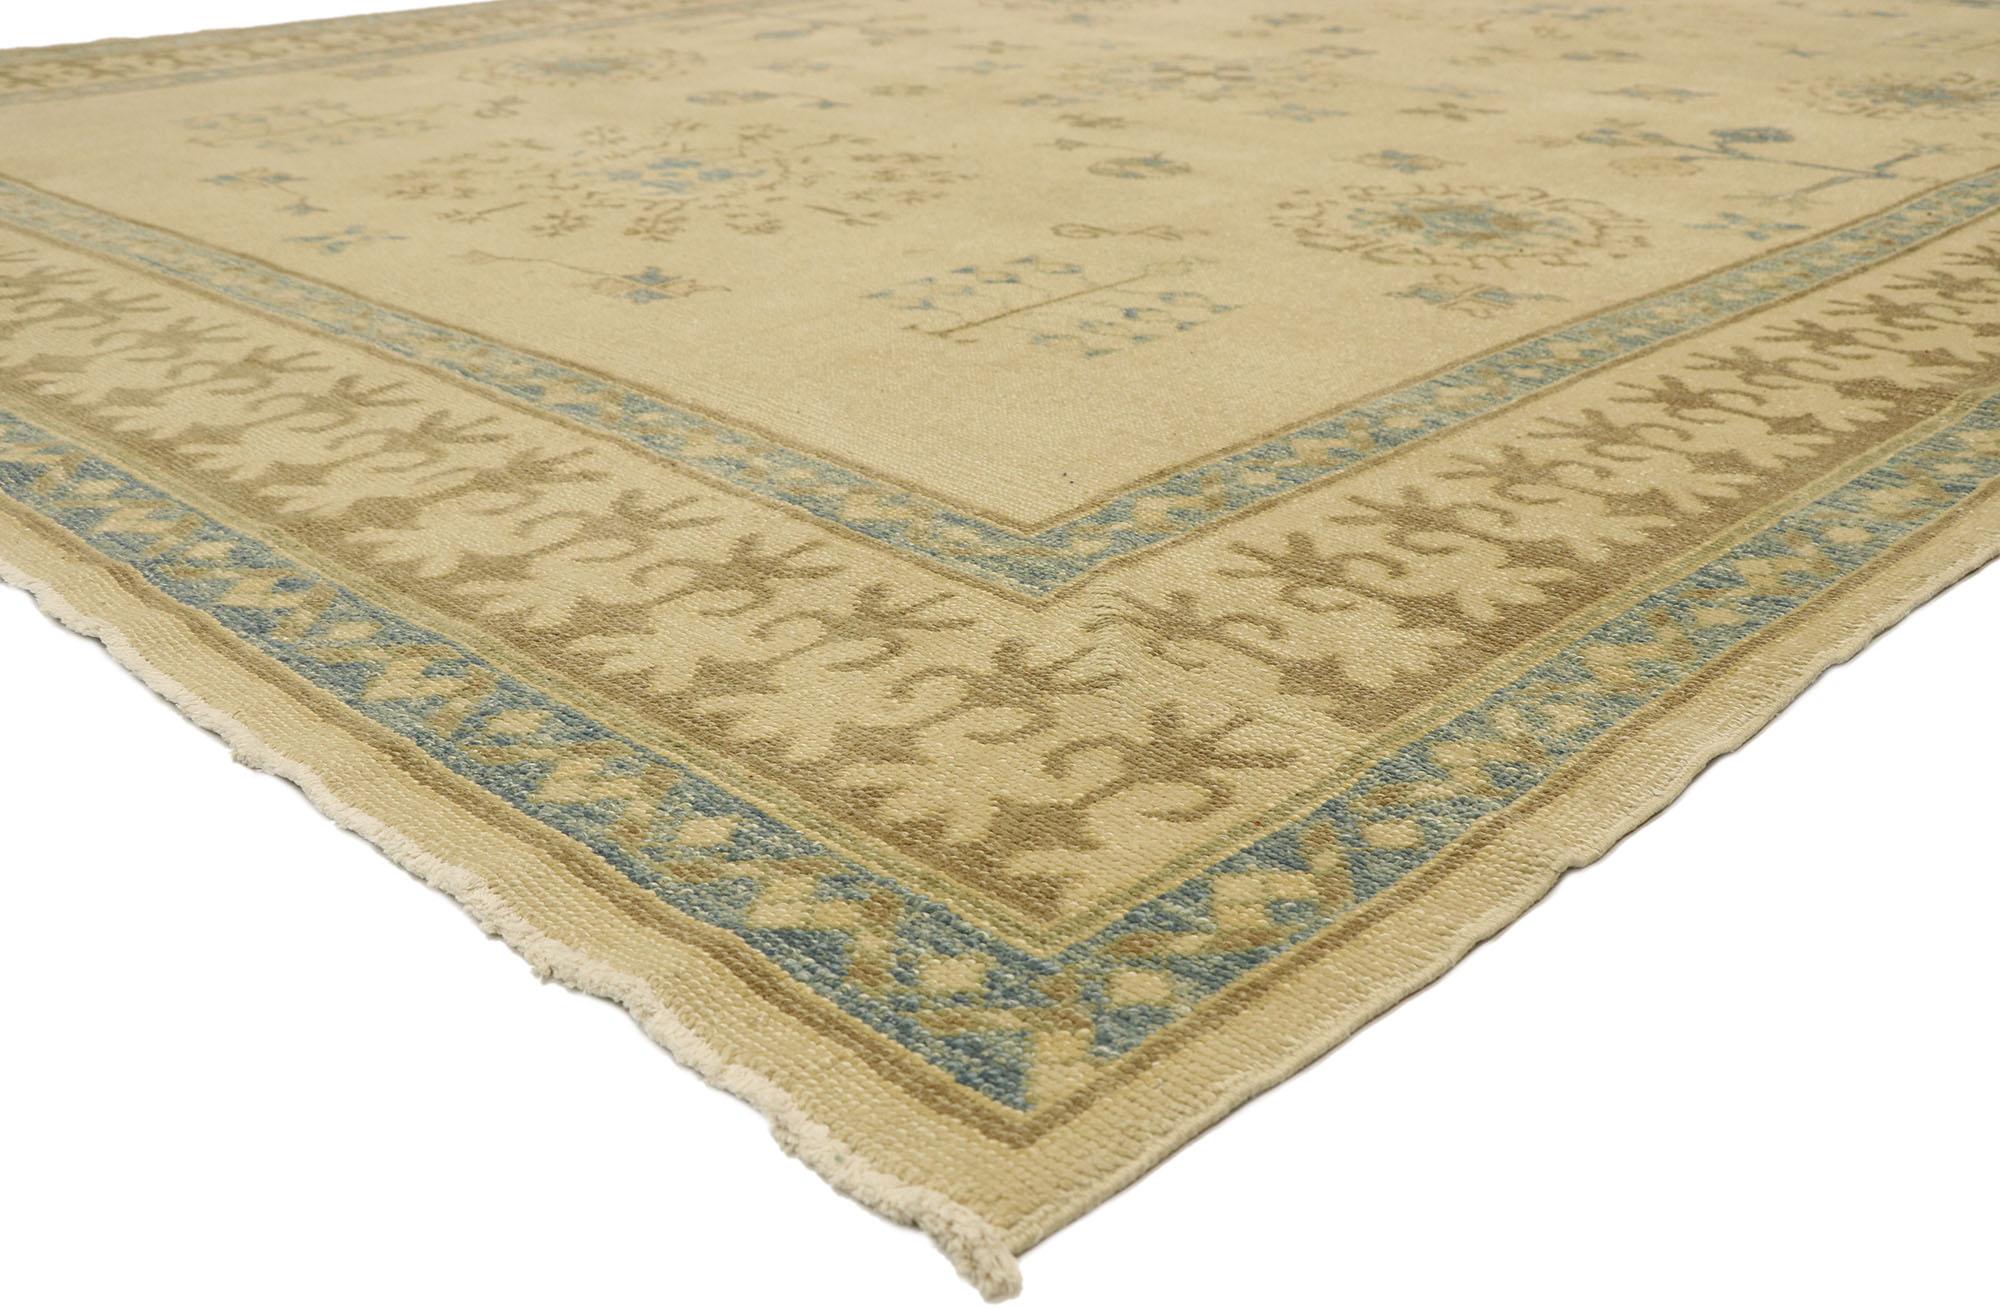 51617 New Contemporary Turkish Oushak rug with Transitional Coastal Cottage style. With its light and airy colors combined with nostalgic coastal cottage charm, this hand knotted wool Turkish Oushak rug creates an inimitable warmth and calming